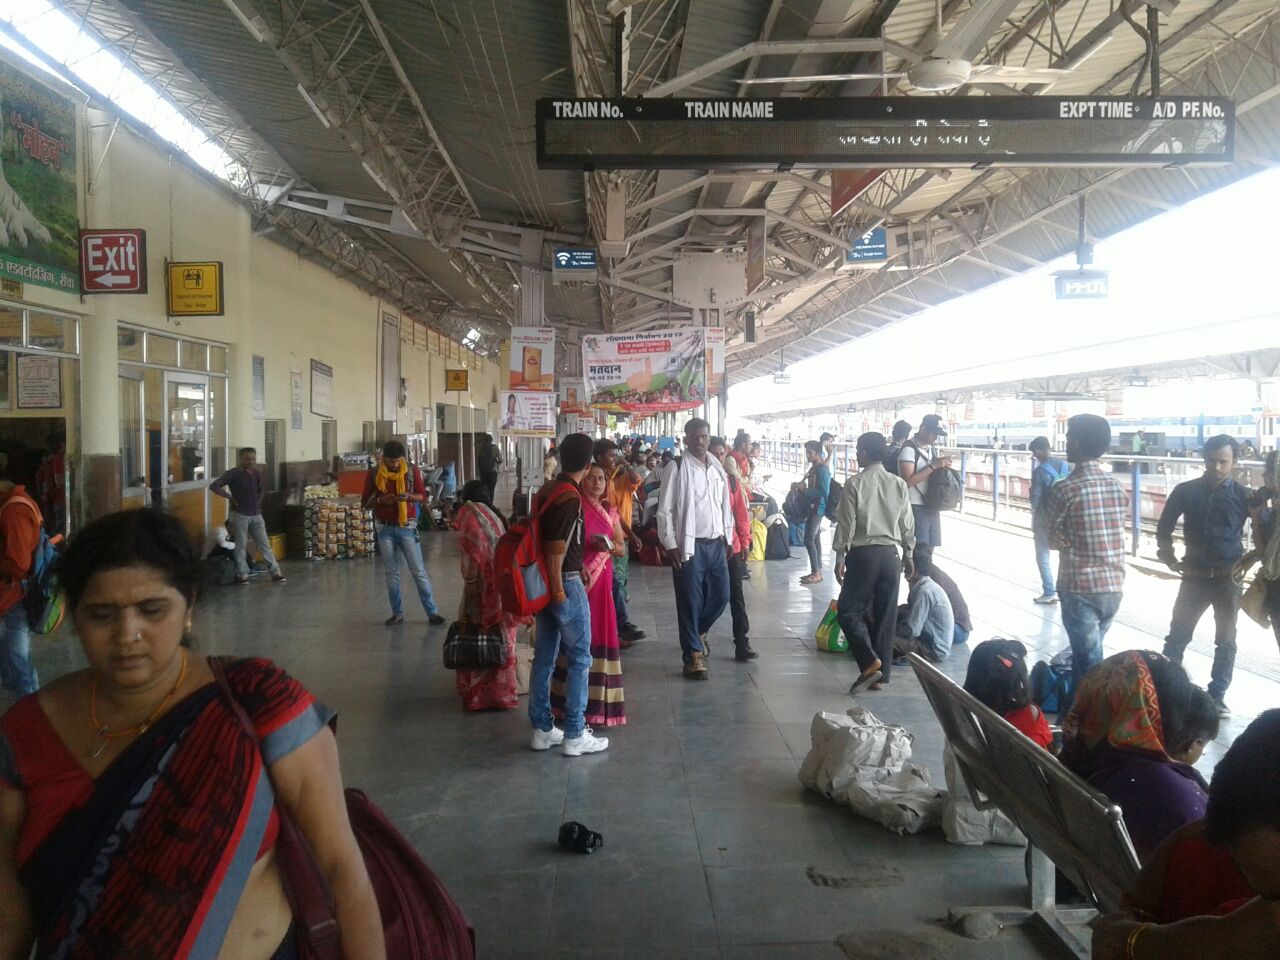 Railways have increased the speed of trains in the platform,